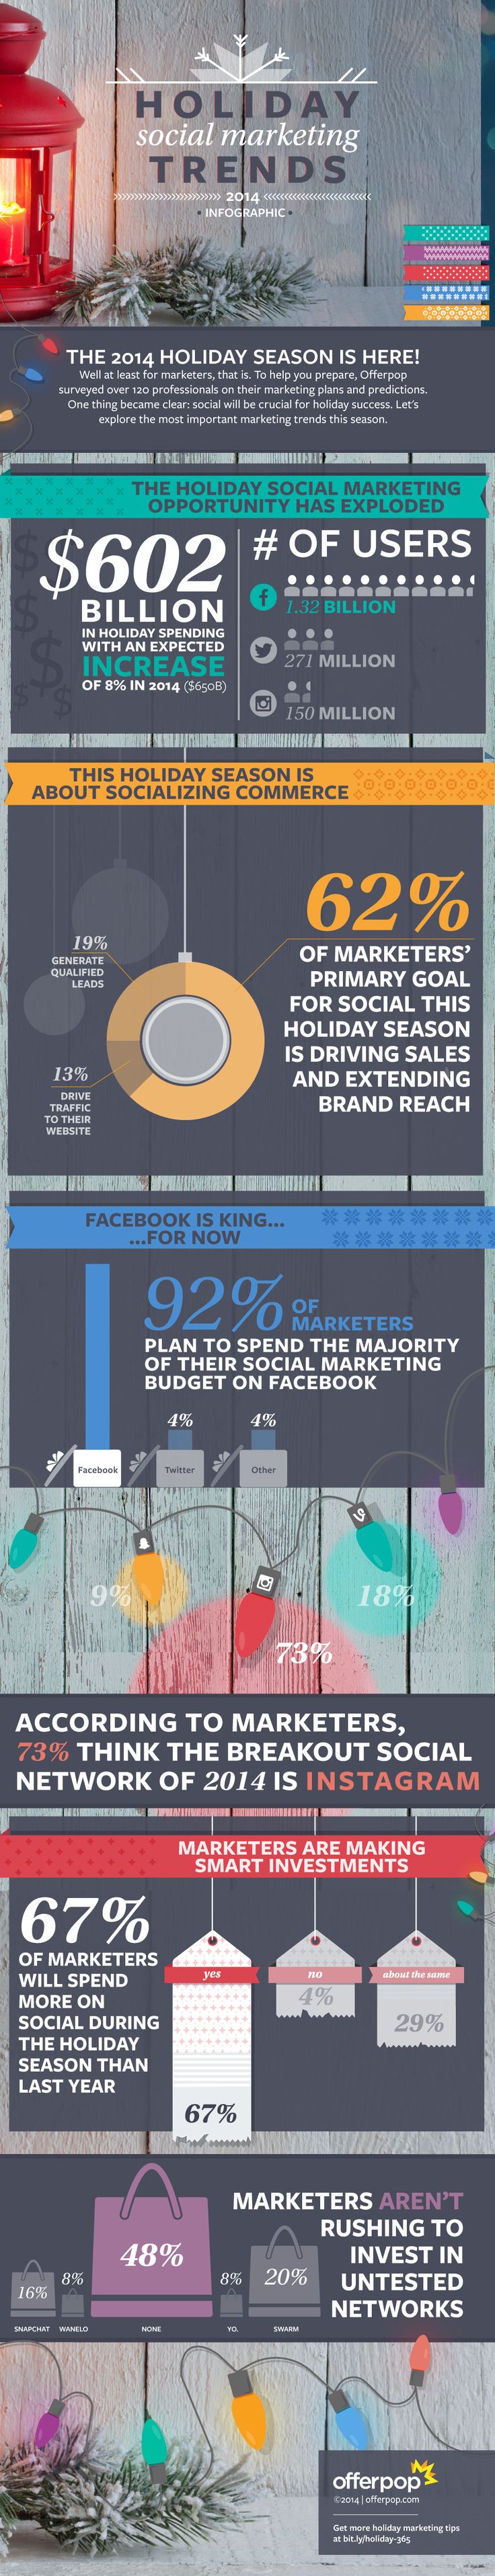 holiday social media marketing trends infographic